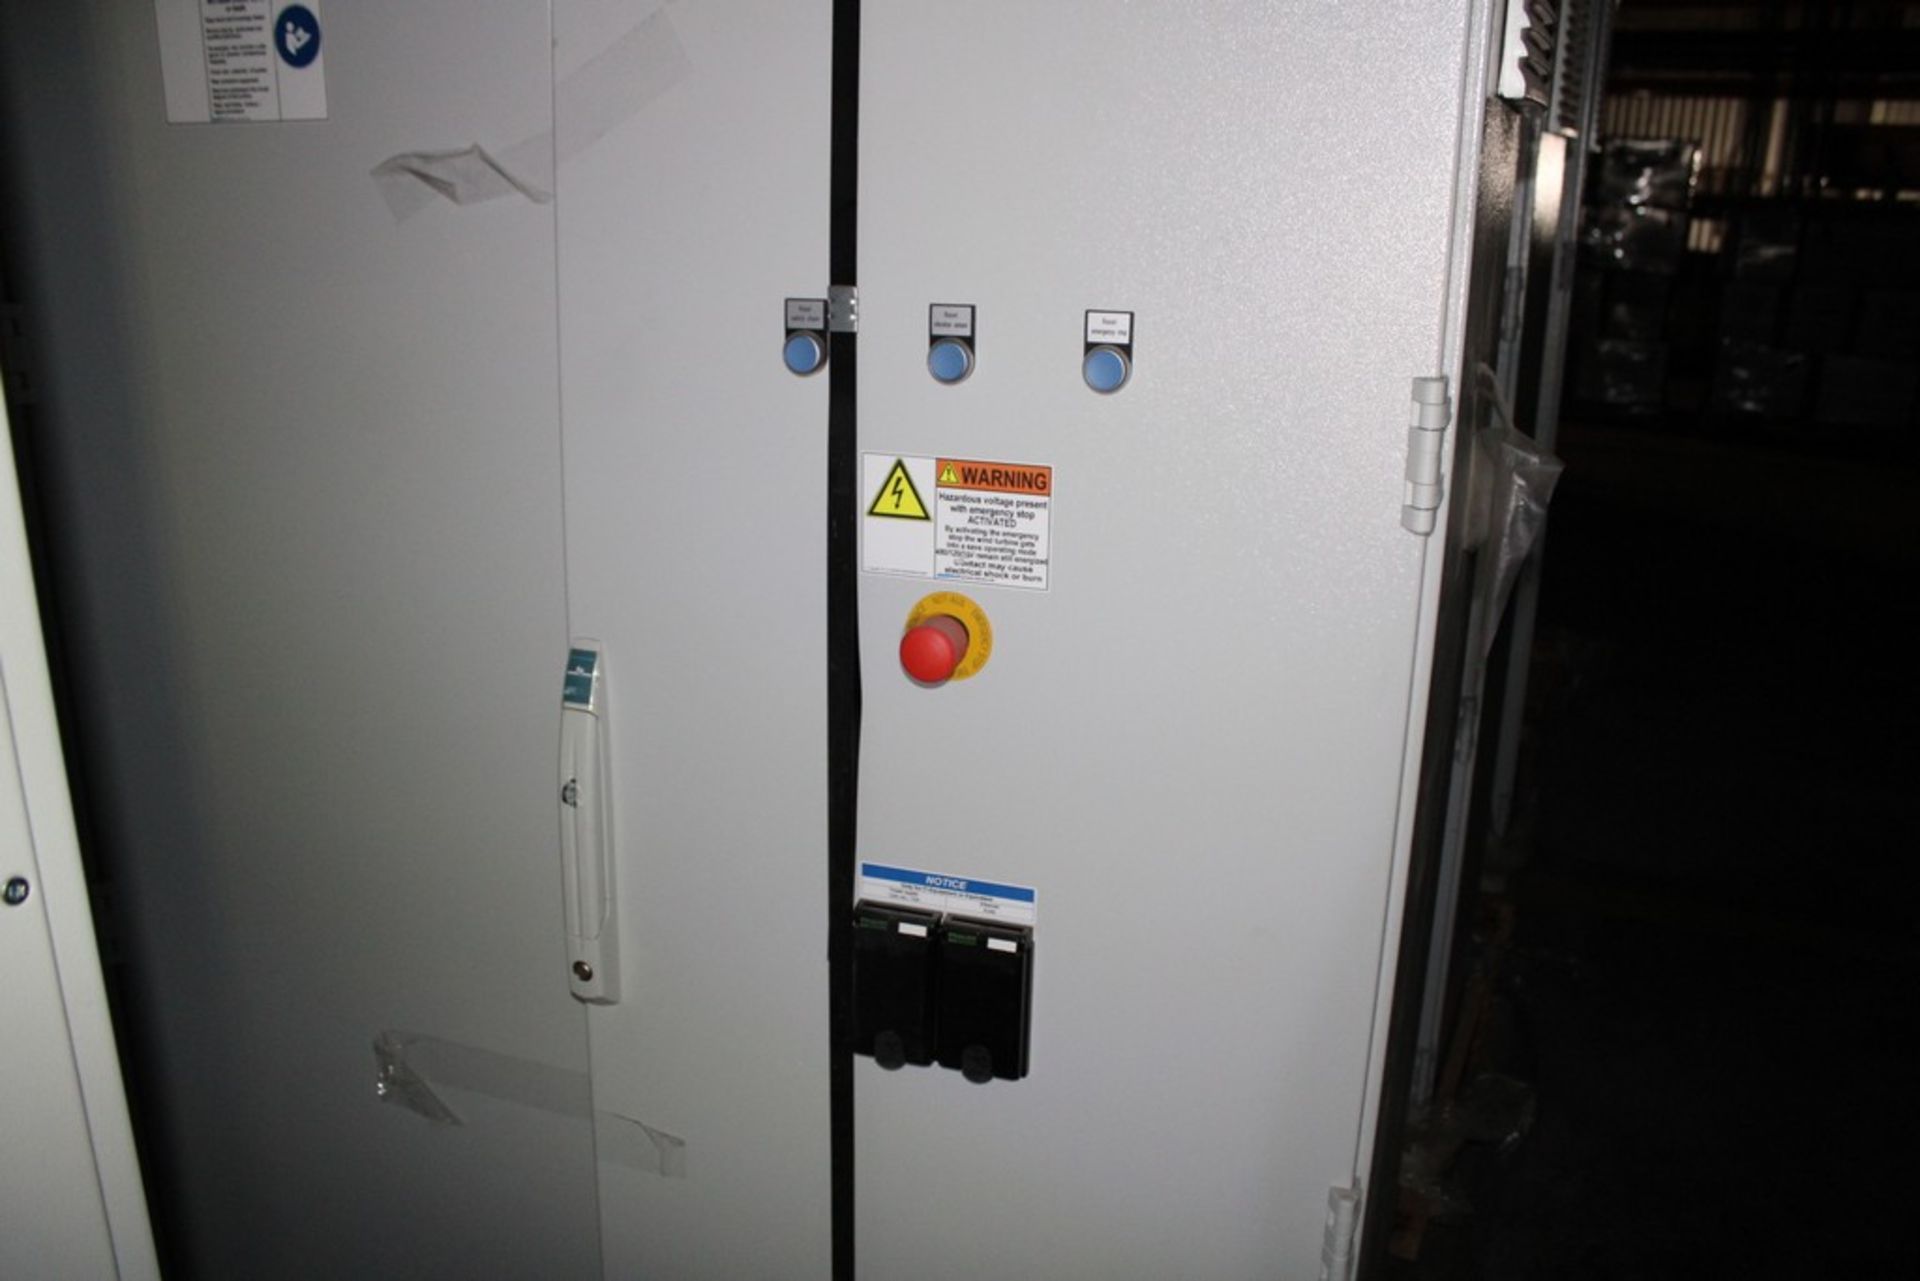 HF INDUSTRIAL CONTROL PANEL MODEL DEWIND D9.2 SWITCH CABINET NACELLE - Image 2 of 3